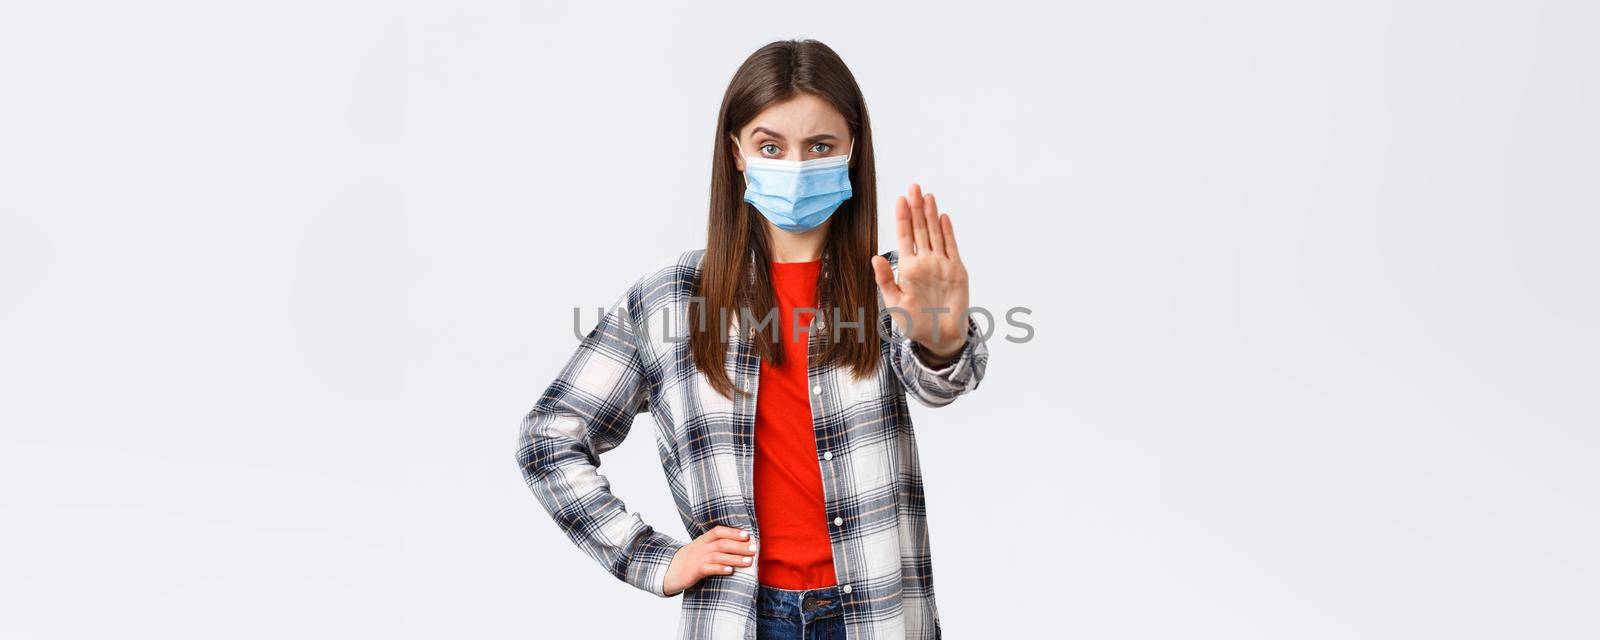 Coronavirus outbreak, leisure on quarantine, social distancing and emotions concept. Where you think going. Displeased young woman in medical mask, stretch hand forward in stop gesture.